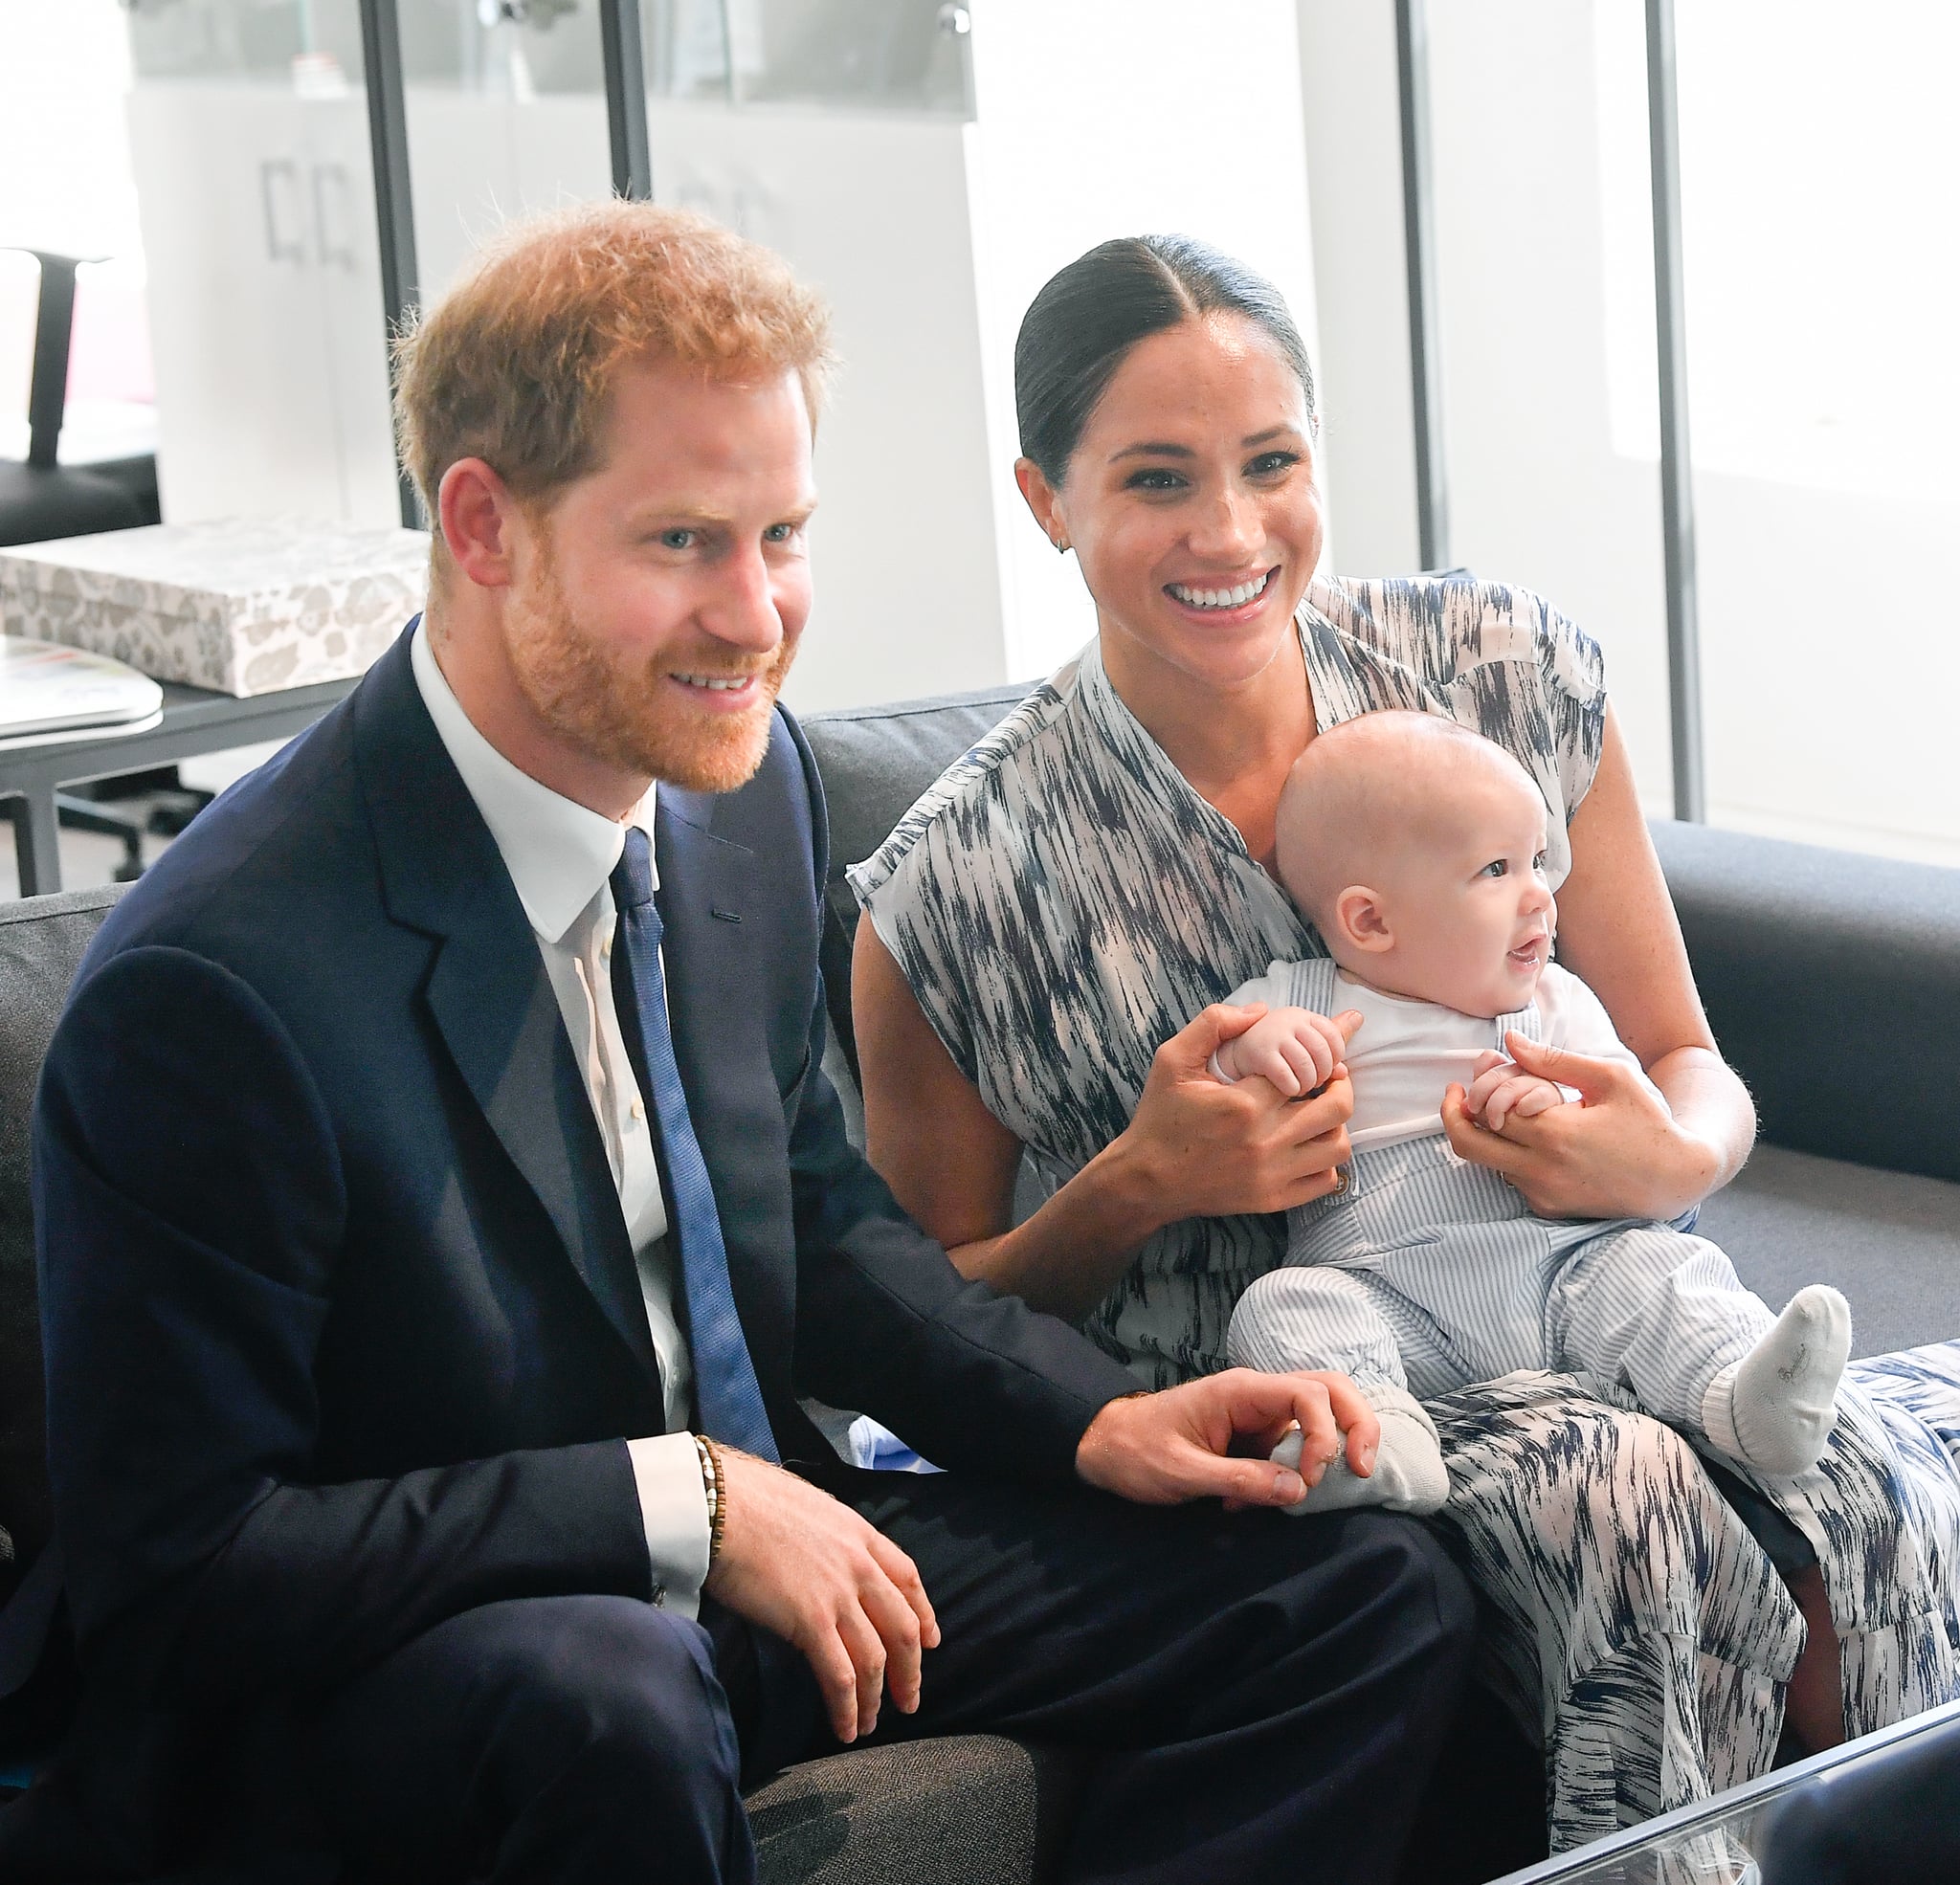 CAPE TOWN, SOUTH AFRICA - SEPTEMBER 25: Prince Harry, Duke of Sussex, Meghan, Duchess of Sussex and their baby son Archie Mountbatten-Windsor meet Archbishop Desmond Tutu and his daughter Thandeka Tutu-Gxashe at the Desmond & Leah Tutu Legacy Foundation during their royal tour of South Africa on September 25, 2019 in Cape Town, South Africa. (Photo by Toby Melville/Pool/Samir Hussein/WireImage)